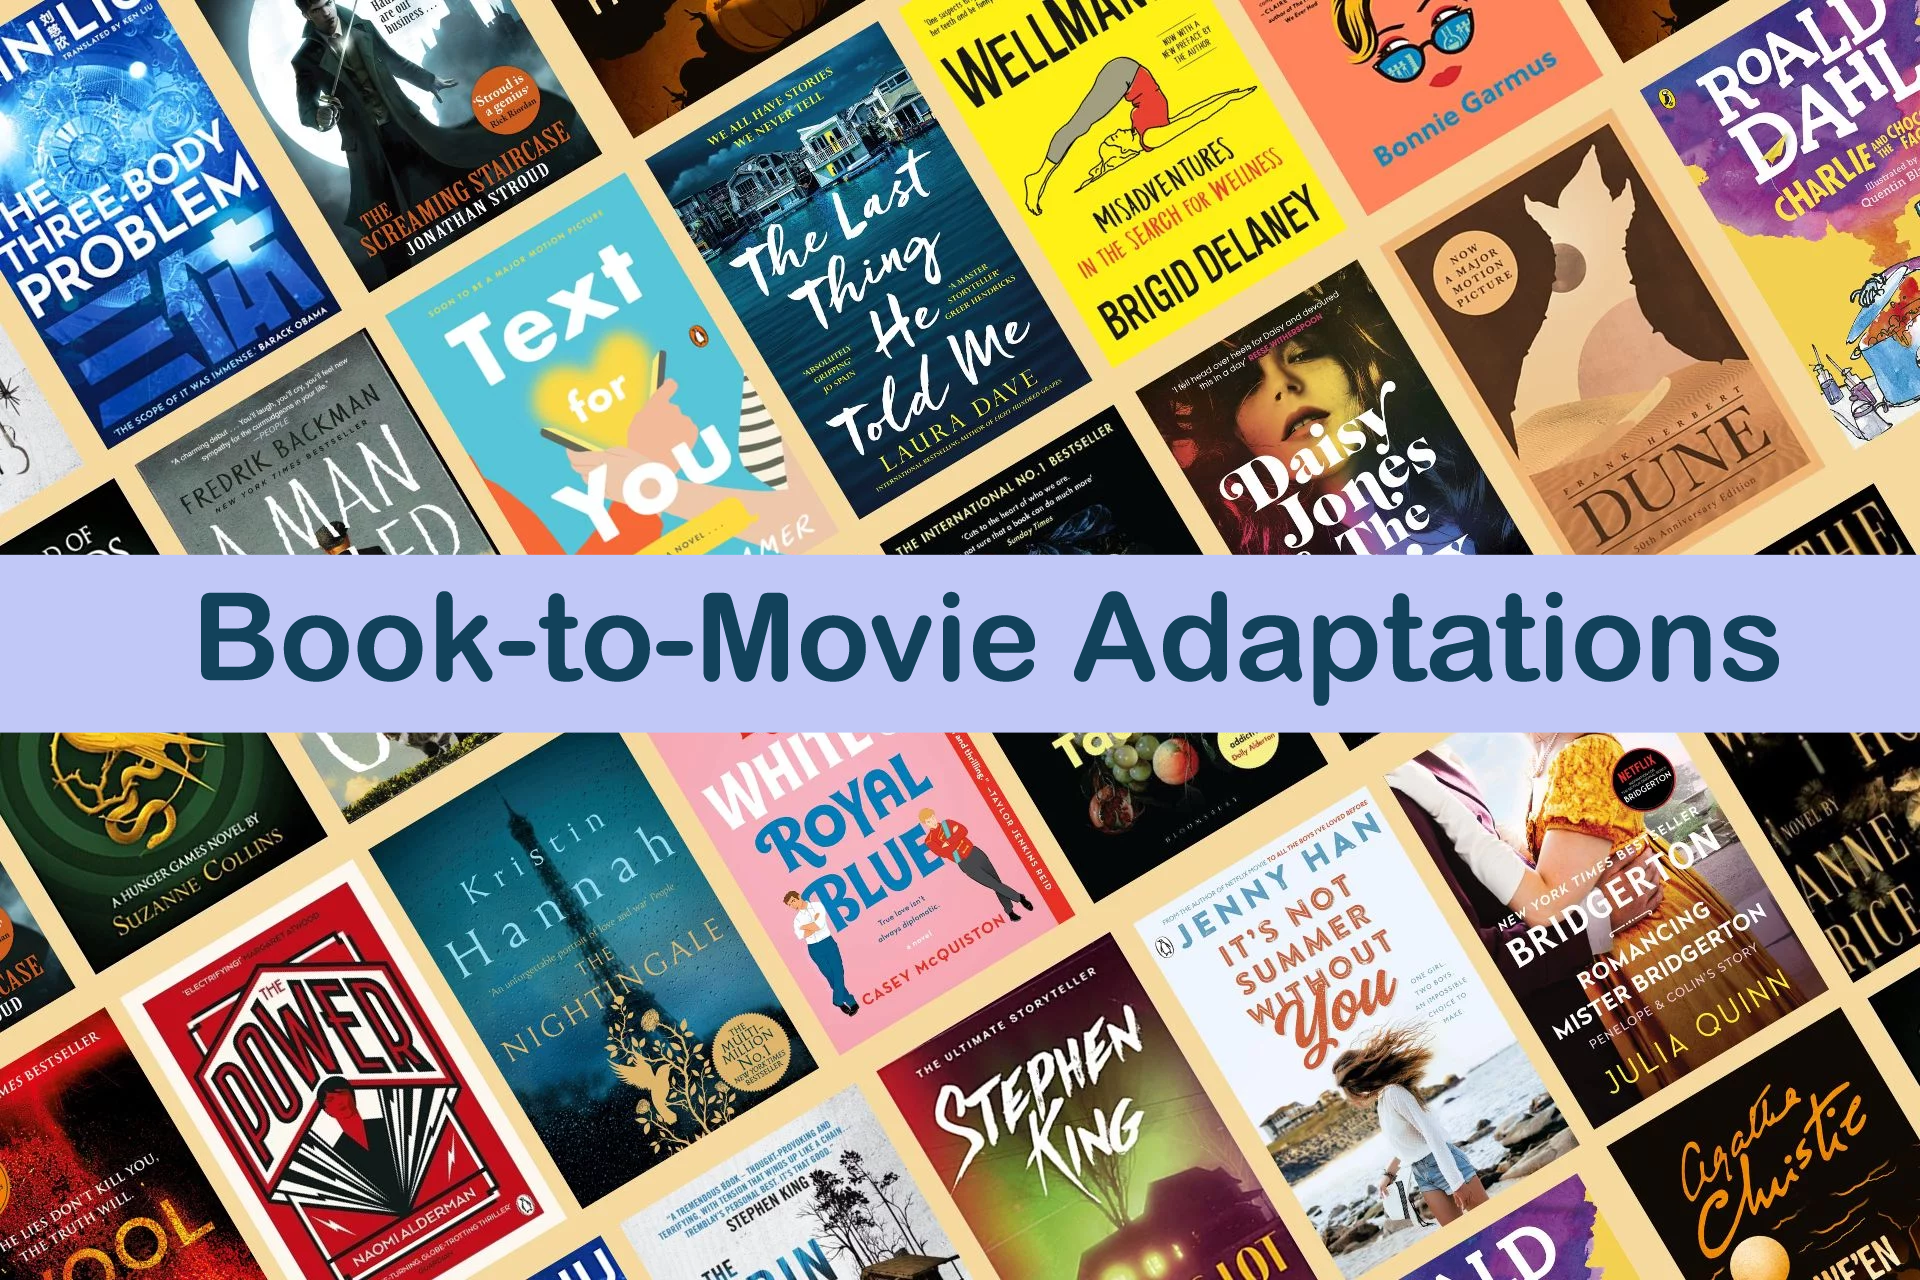 book-to-movie adaptations